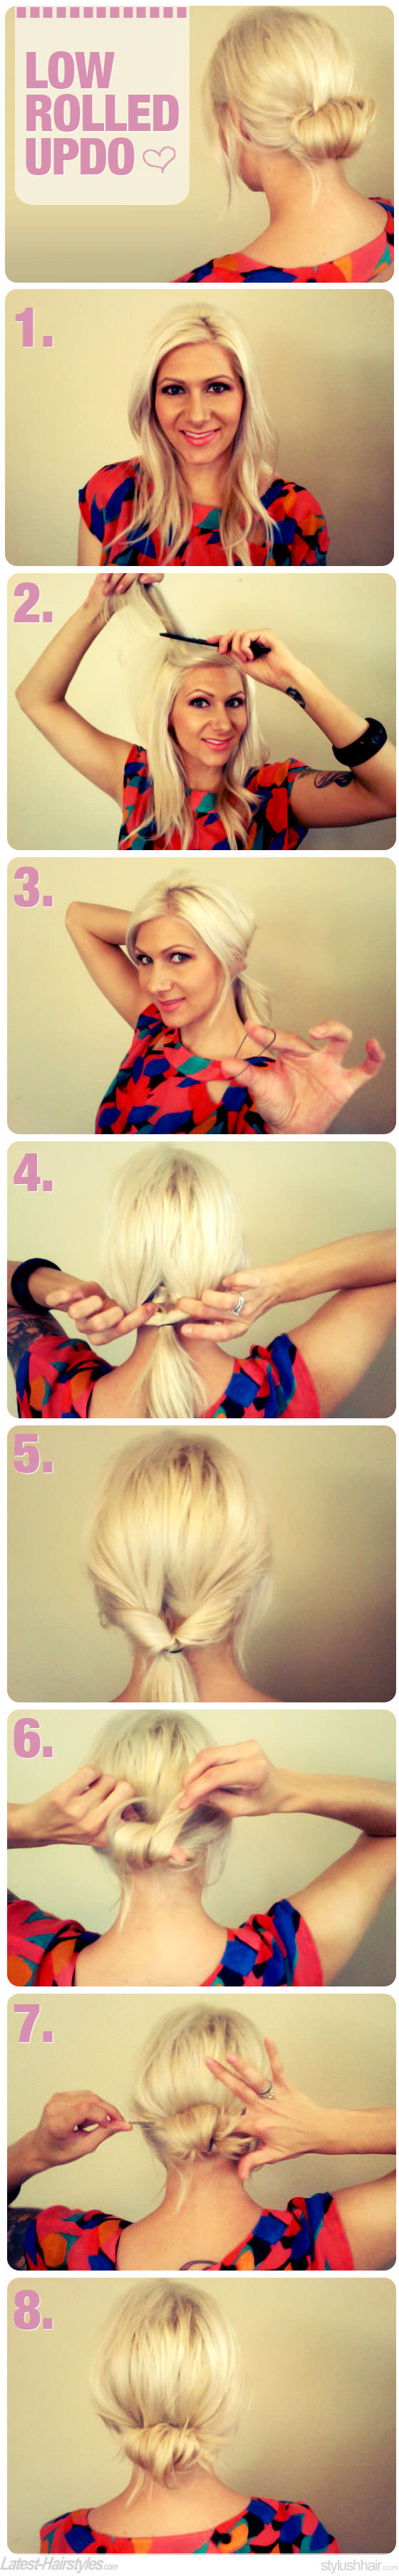 The Super Chic, Low Rolled Updo Hair Tutorial